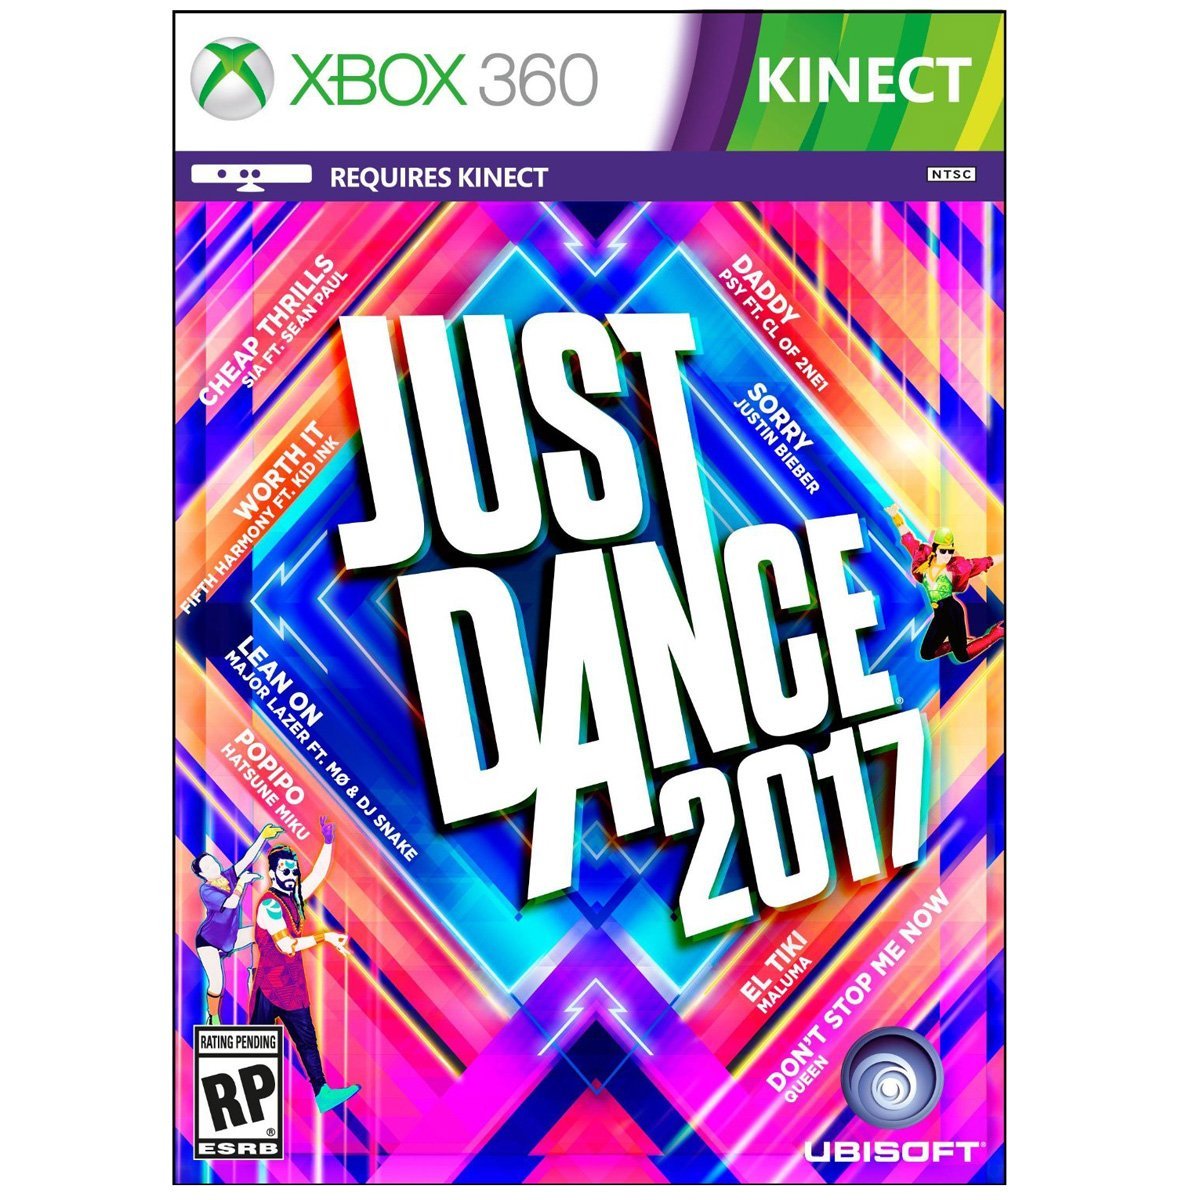 Xbox 360 Just Dance 2017 Limited